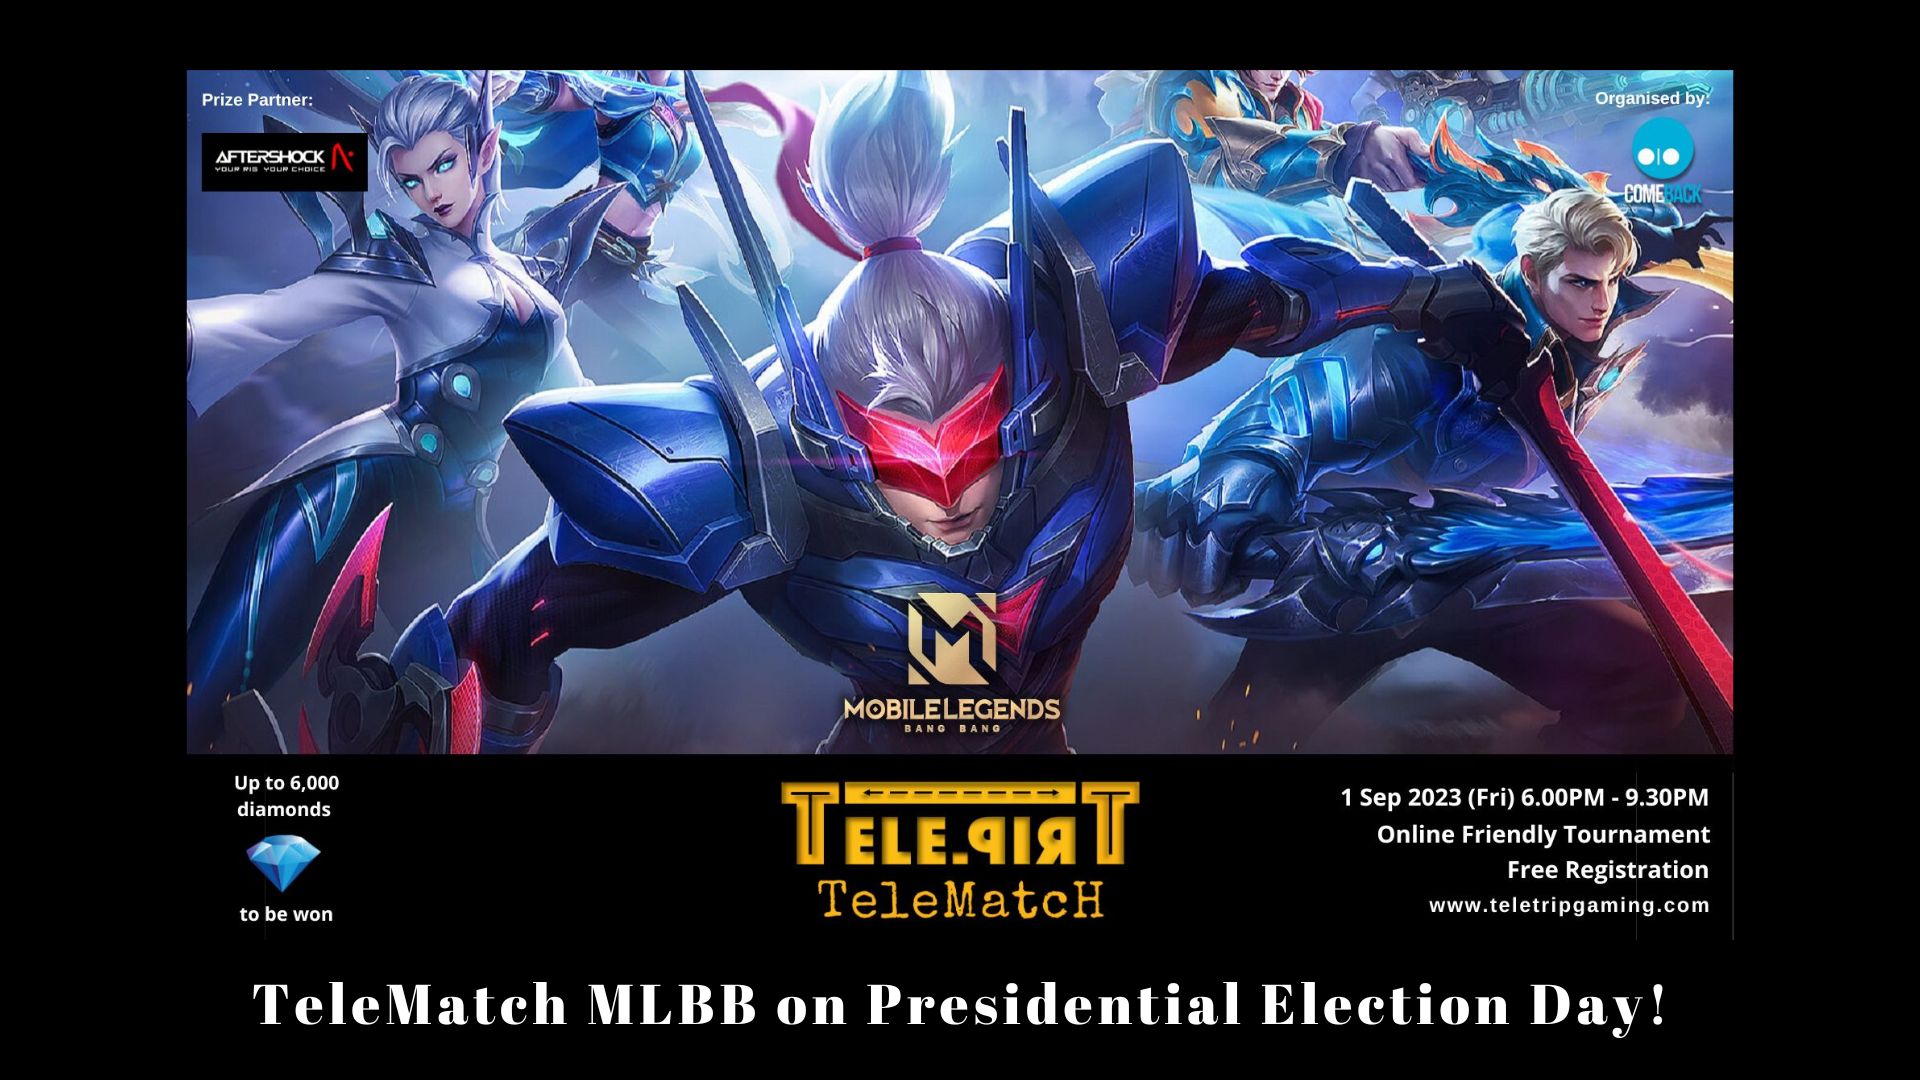 TeleMatch MLBB on Presidential Election Day!